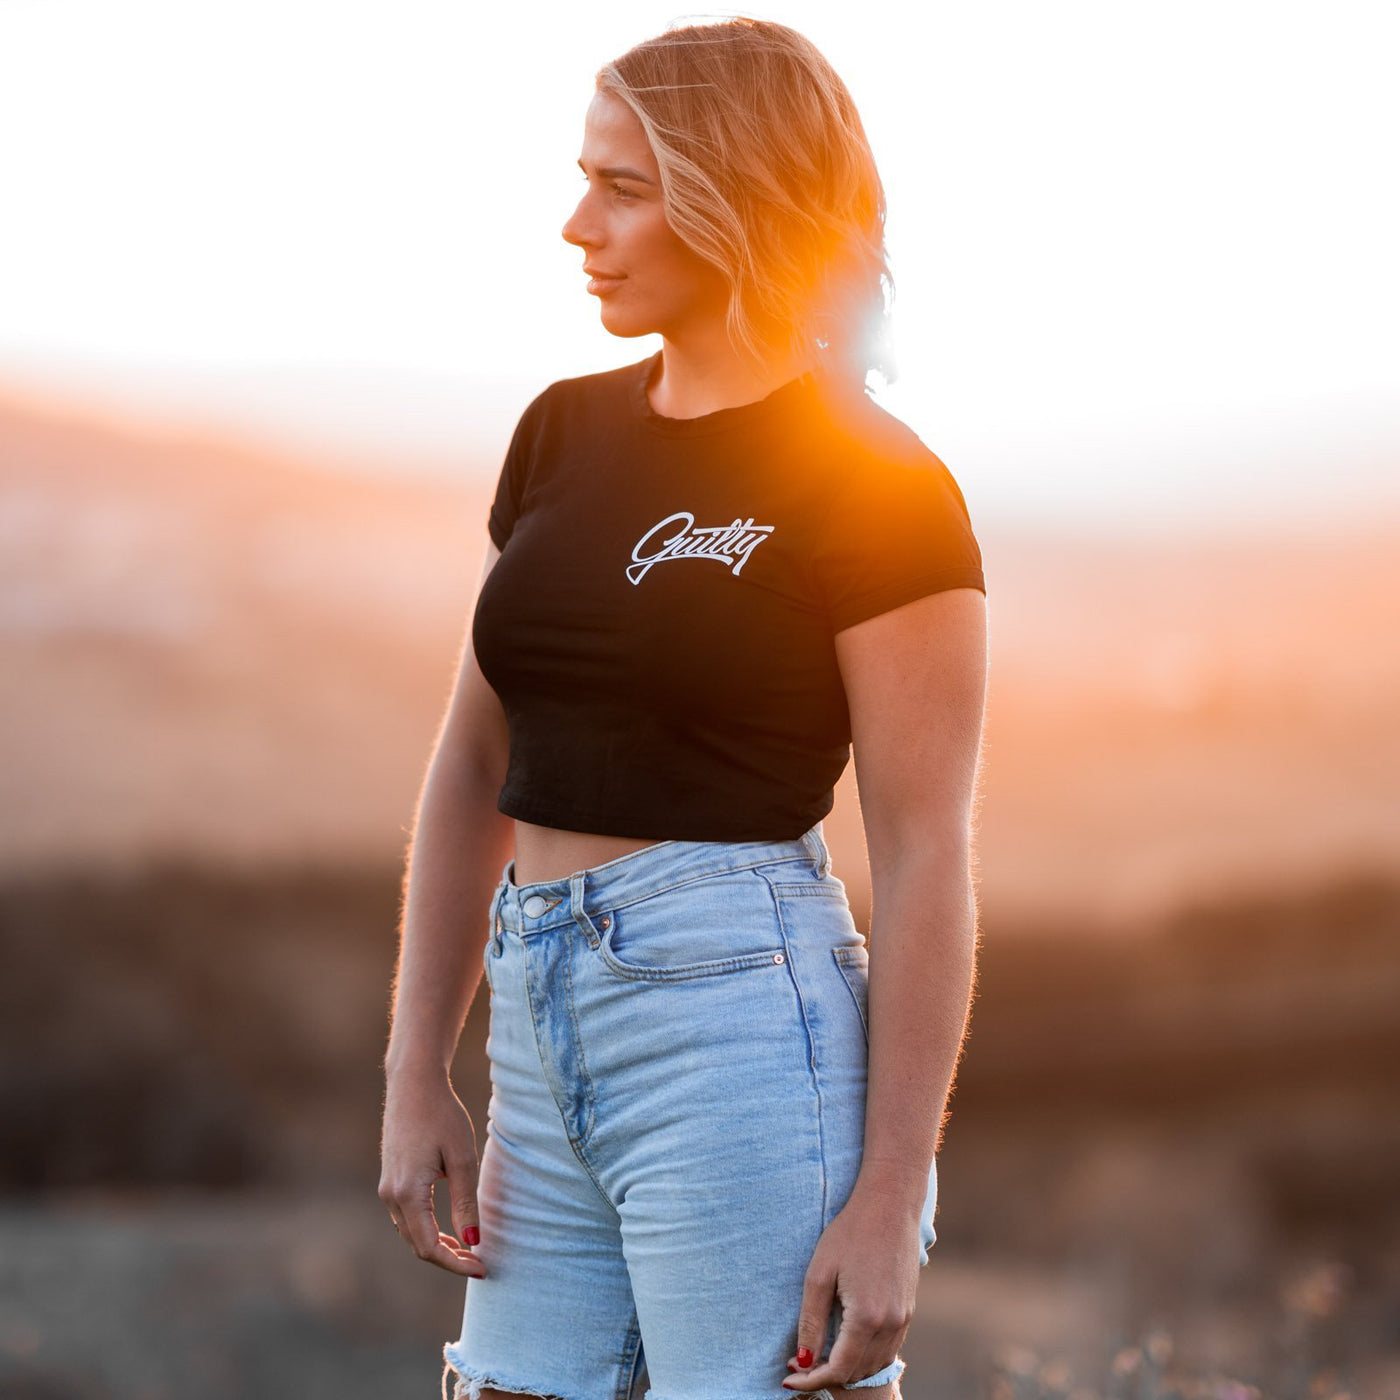 Guilty Crop Tee Black - Women's black crop tee by Guilty Apparel, perfect for action sports and adventure